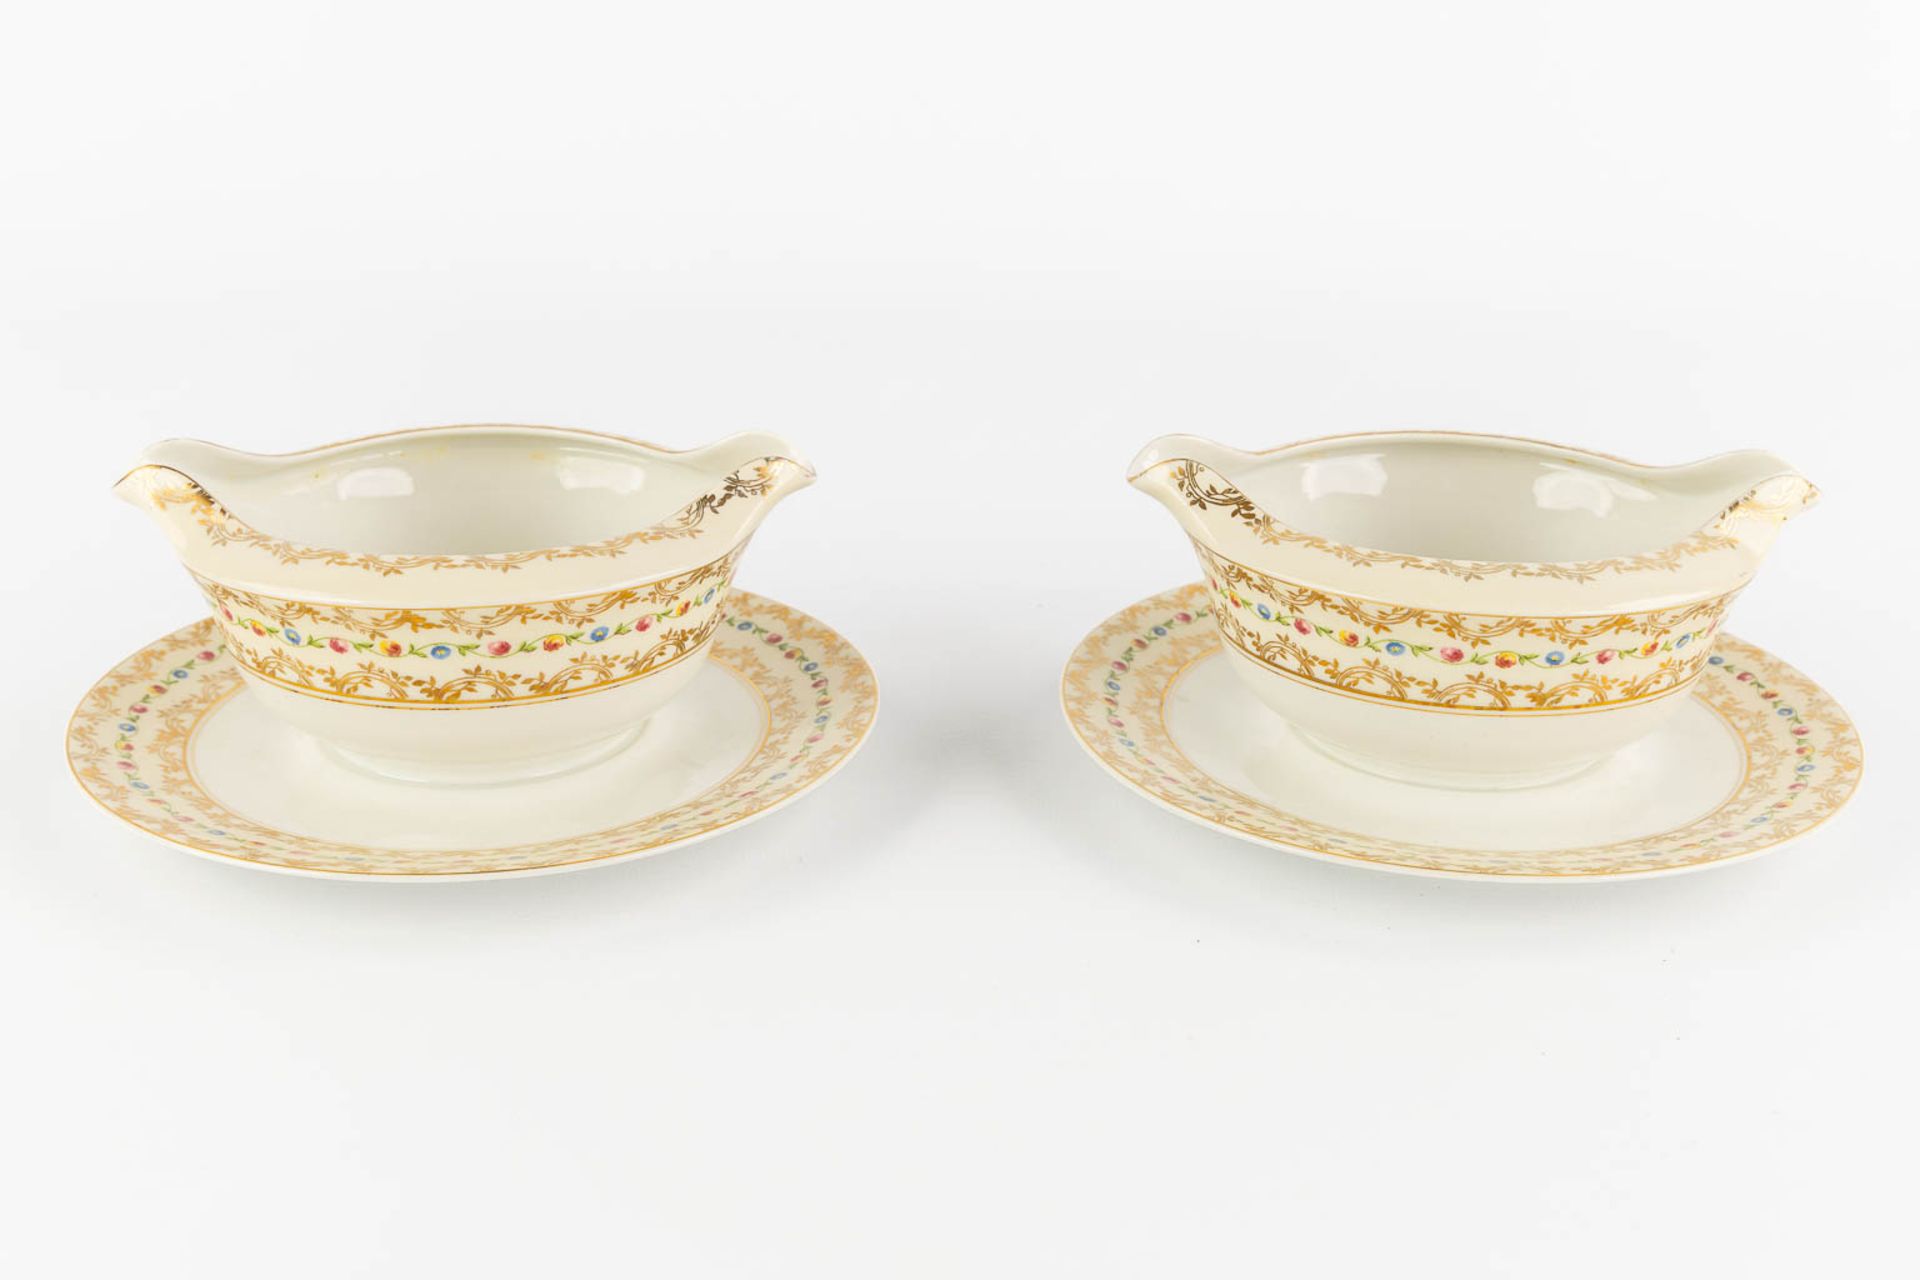 Raynaud, Limoges, a large dinner service. (L:25 x W:35 cm) - Image 11 of 16